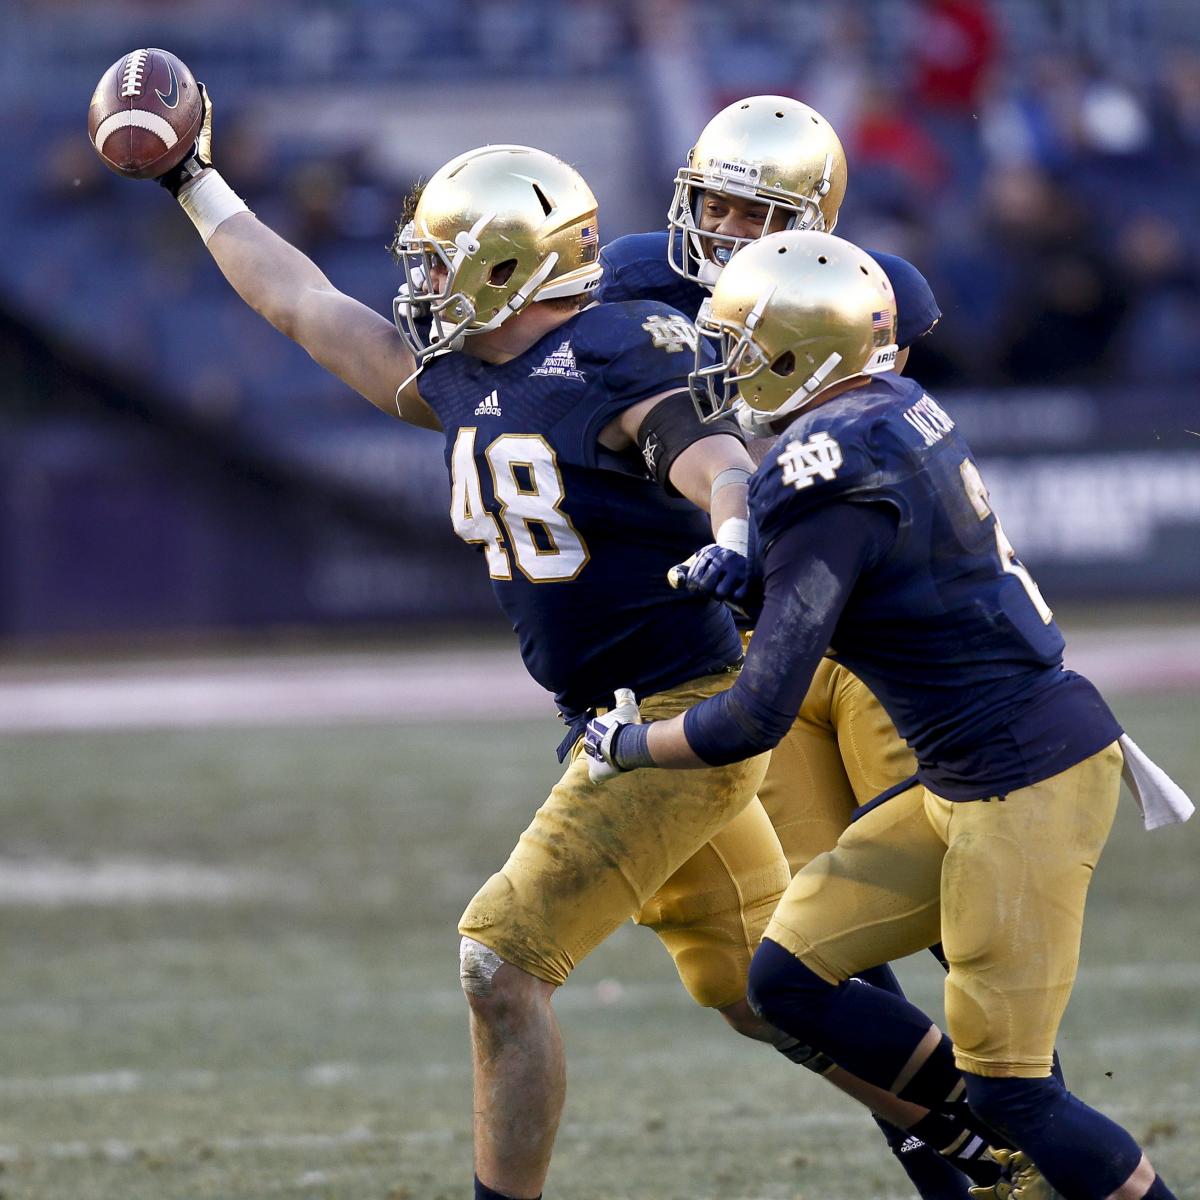 Notre Dame Fighting Irish football uniforms by Under Armour